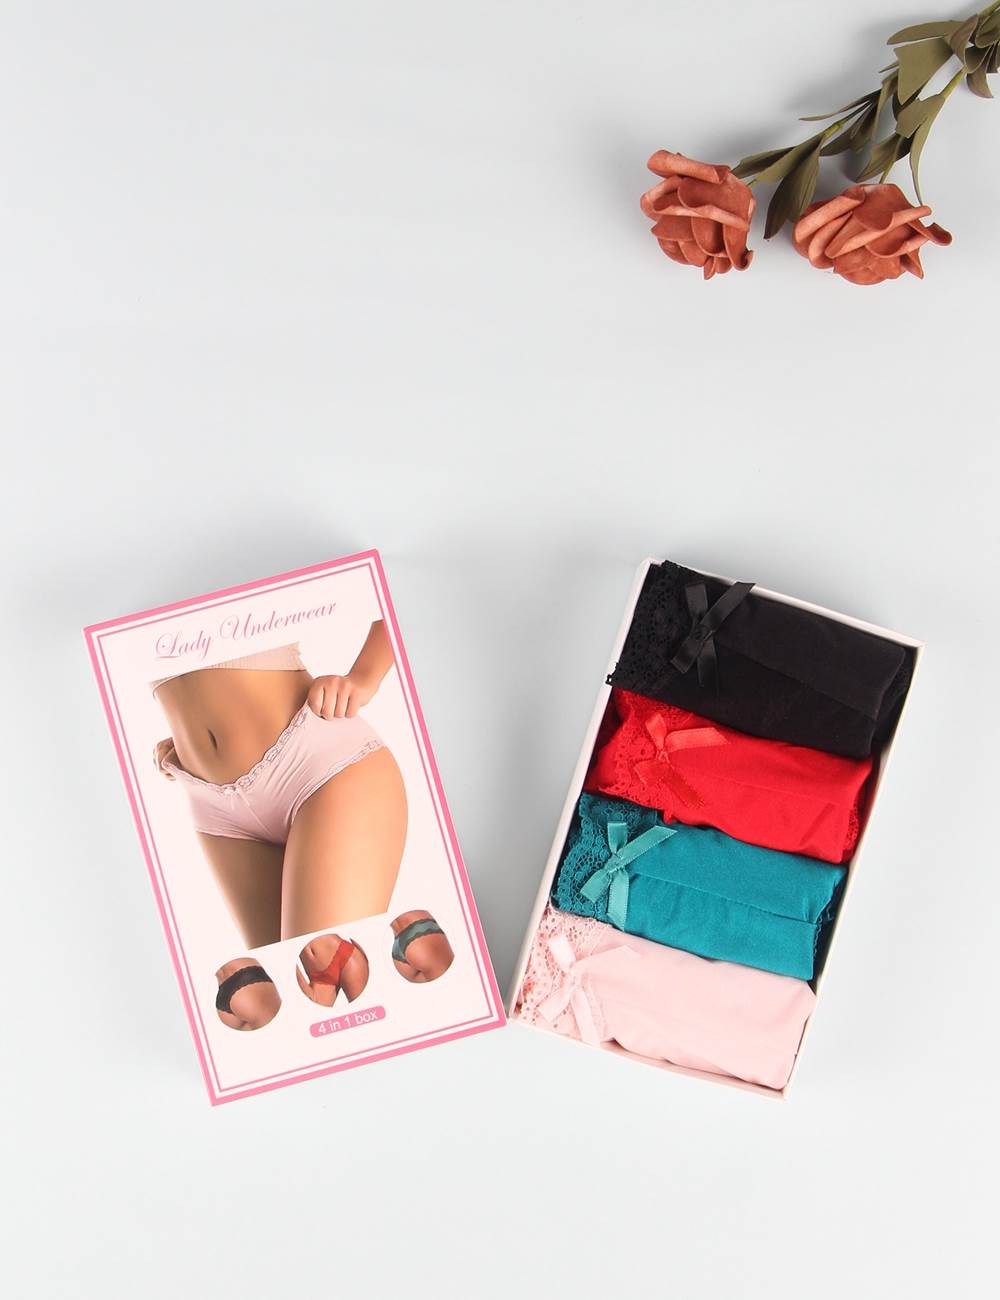 Comfortable Lace Panty 4 in1 Box - XS/S